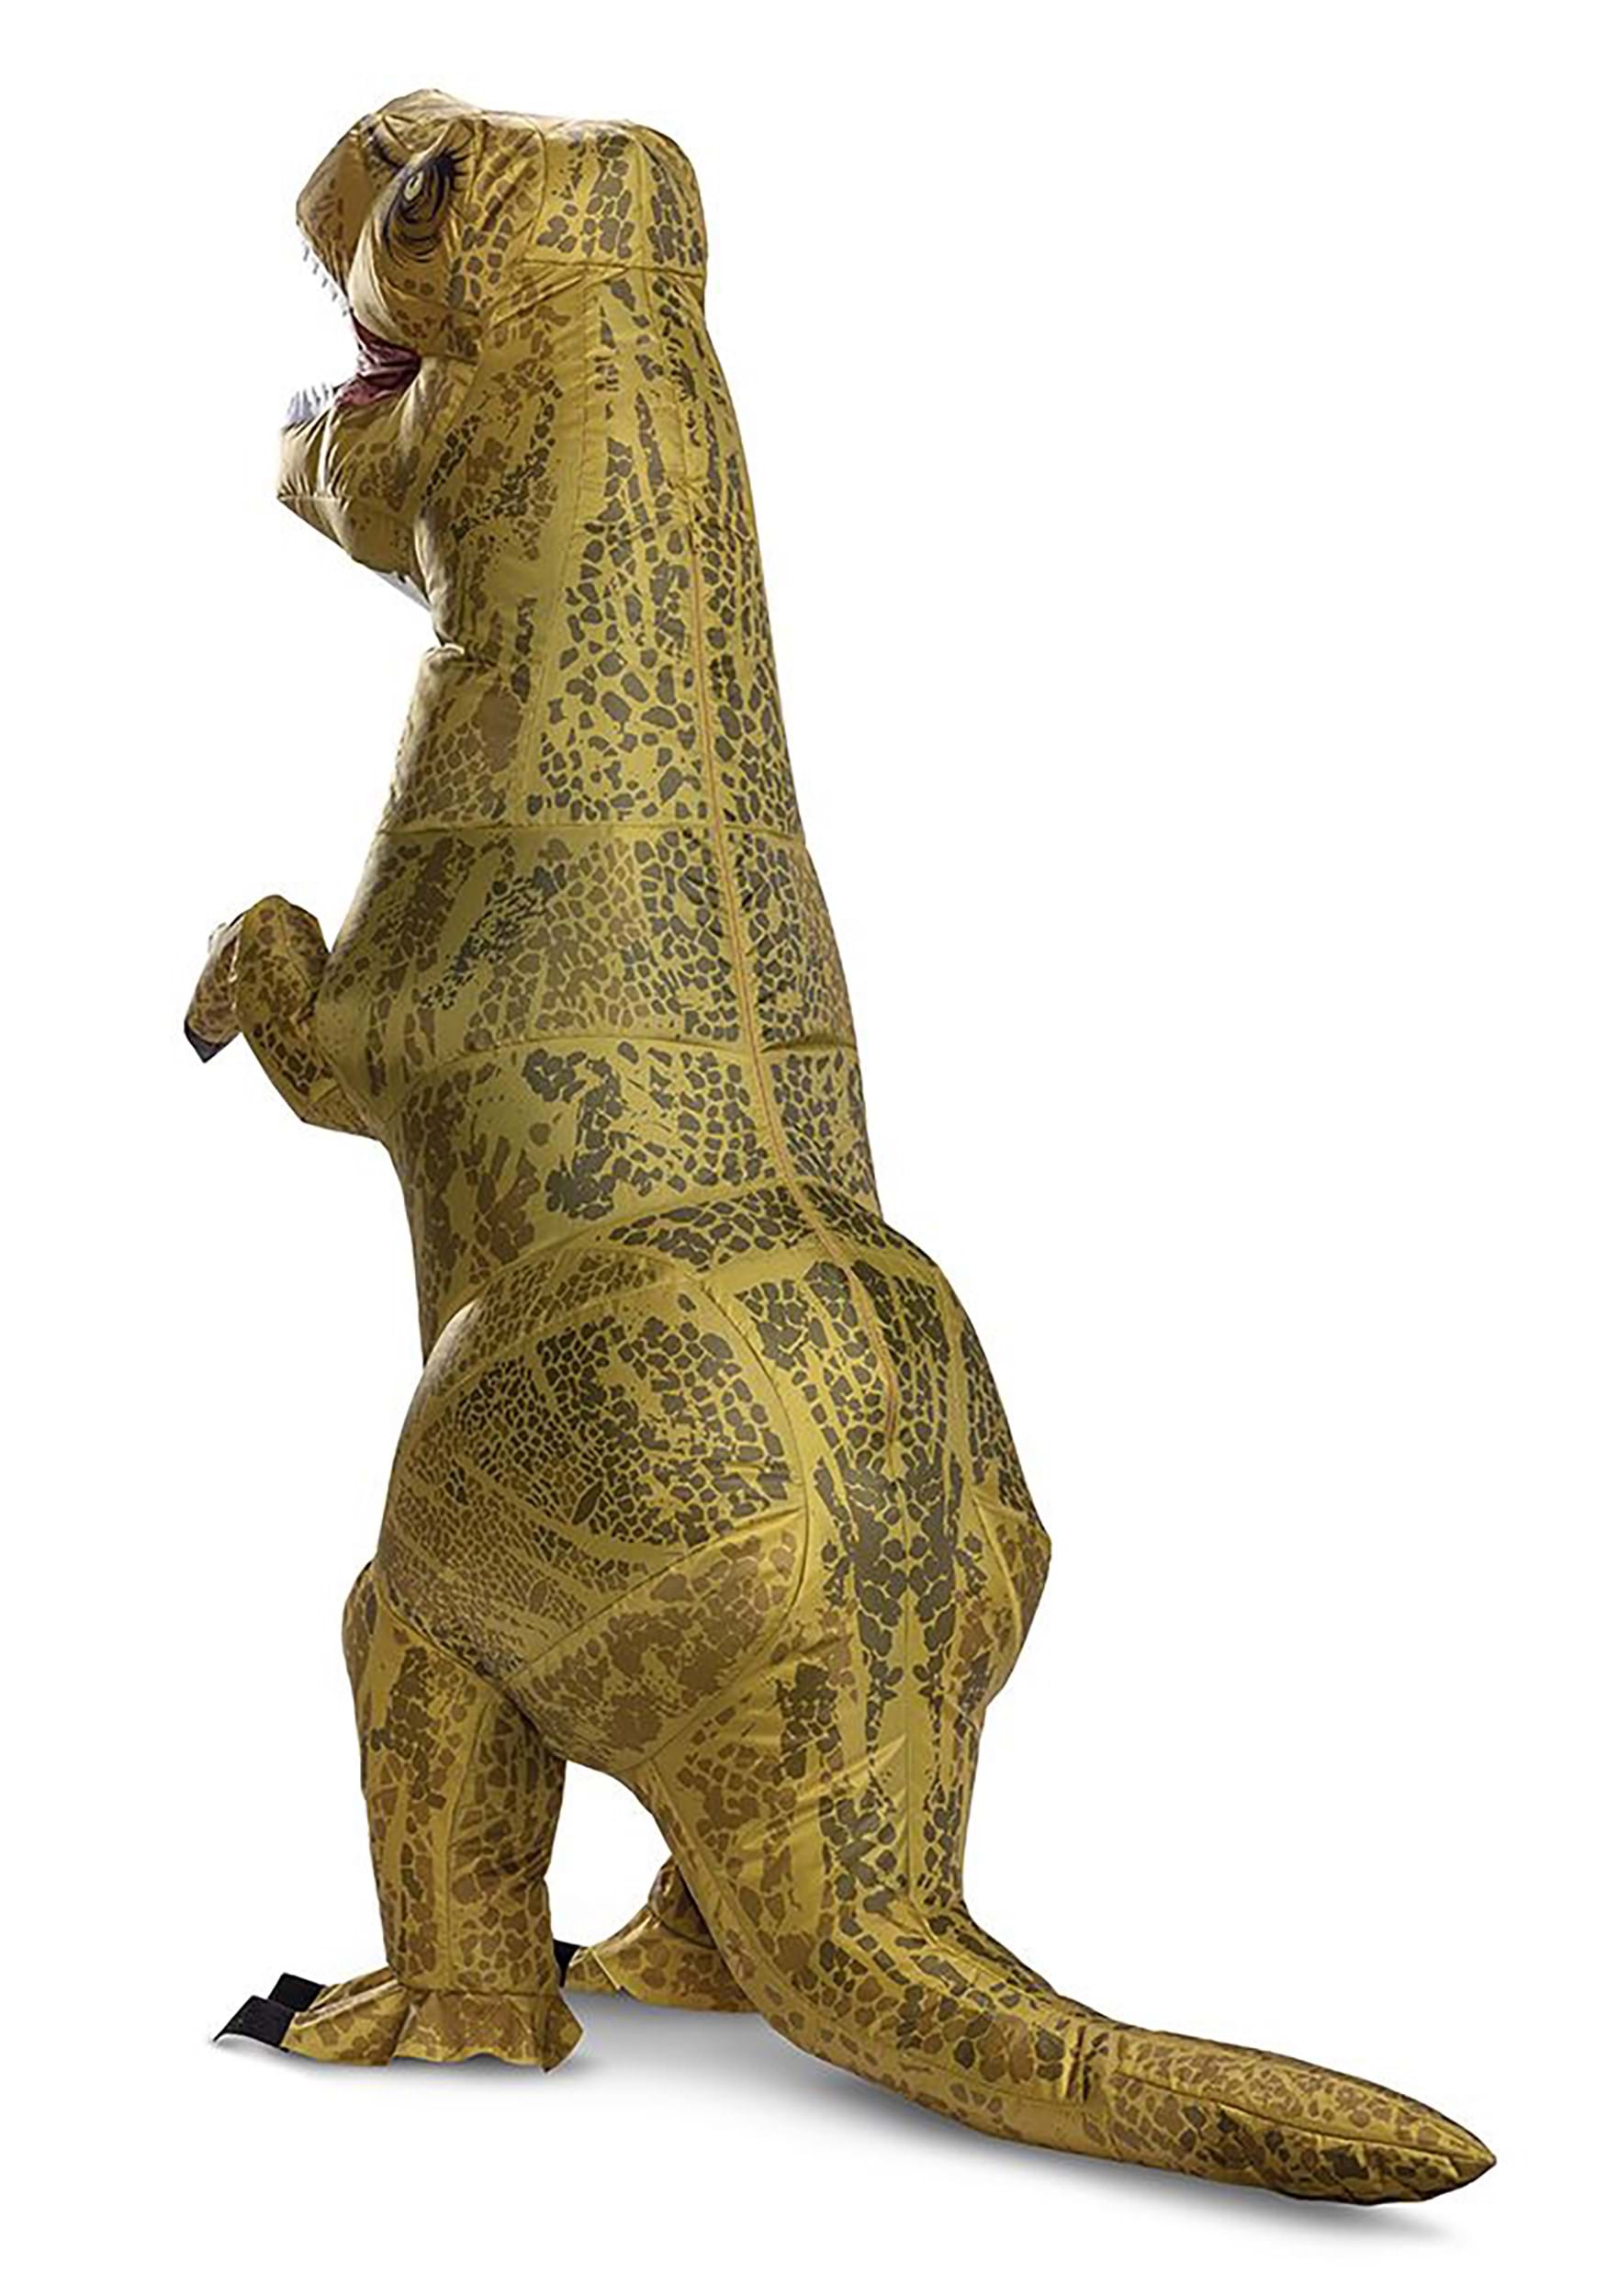 Jurassic World T-Rex Inflatable Costume For Kids